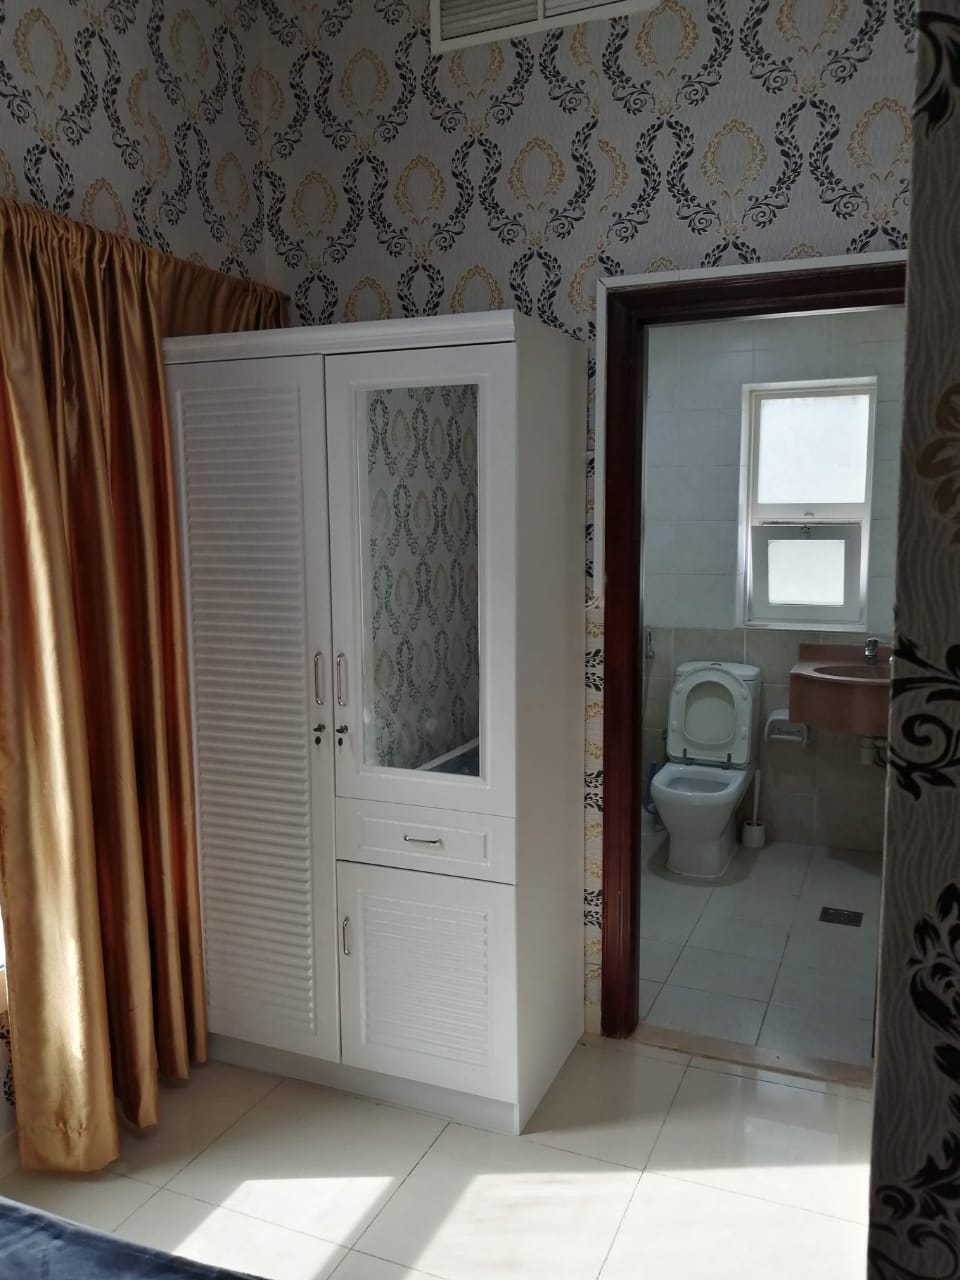 Closed Partition Room With Big Window And Attached Bathroom With Bathtub